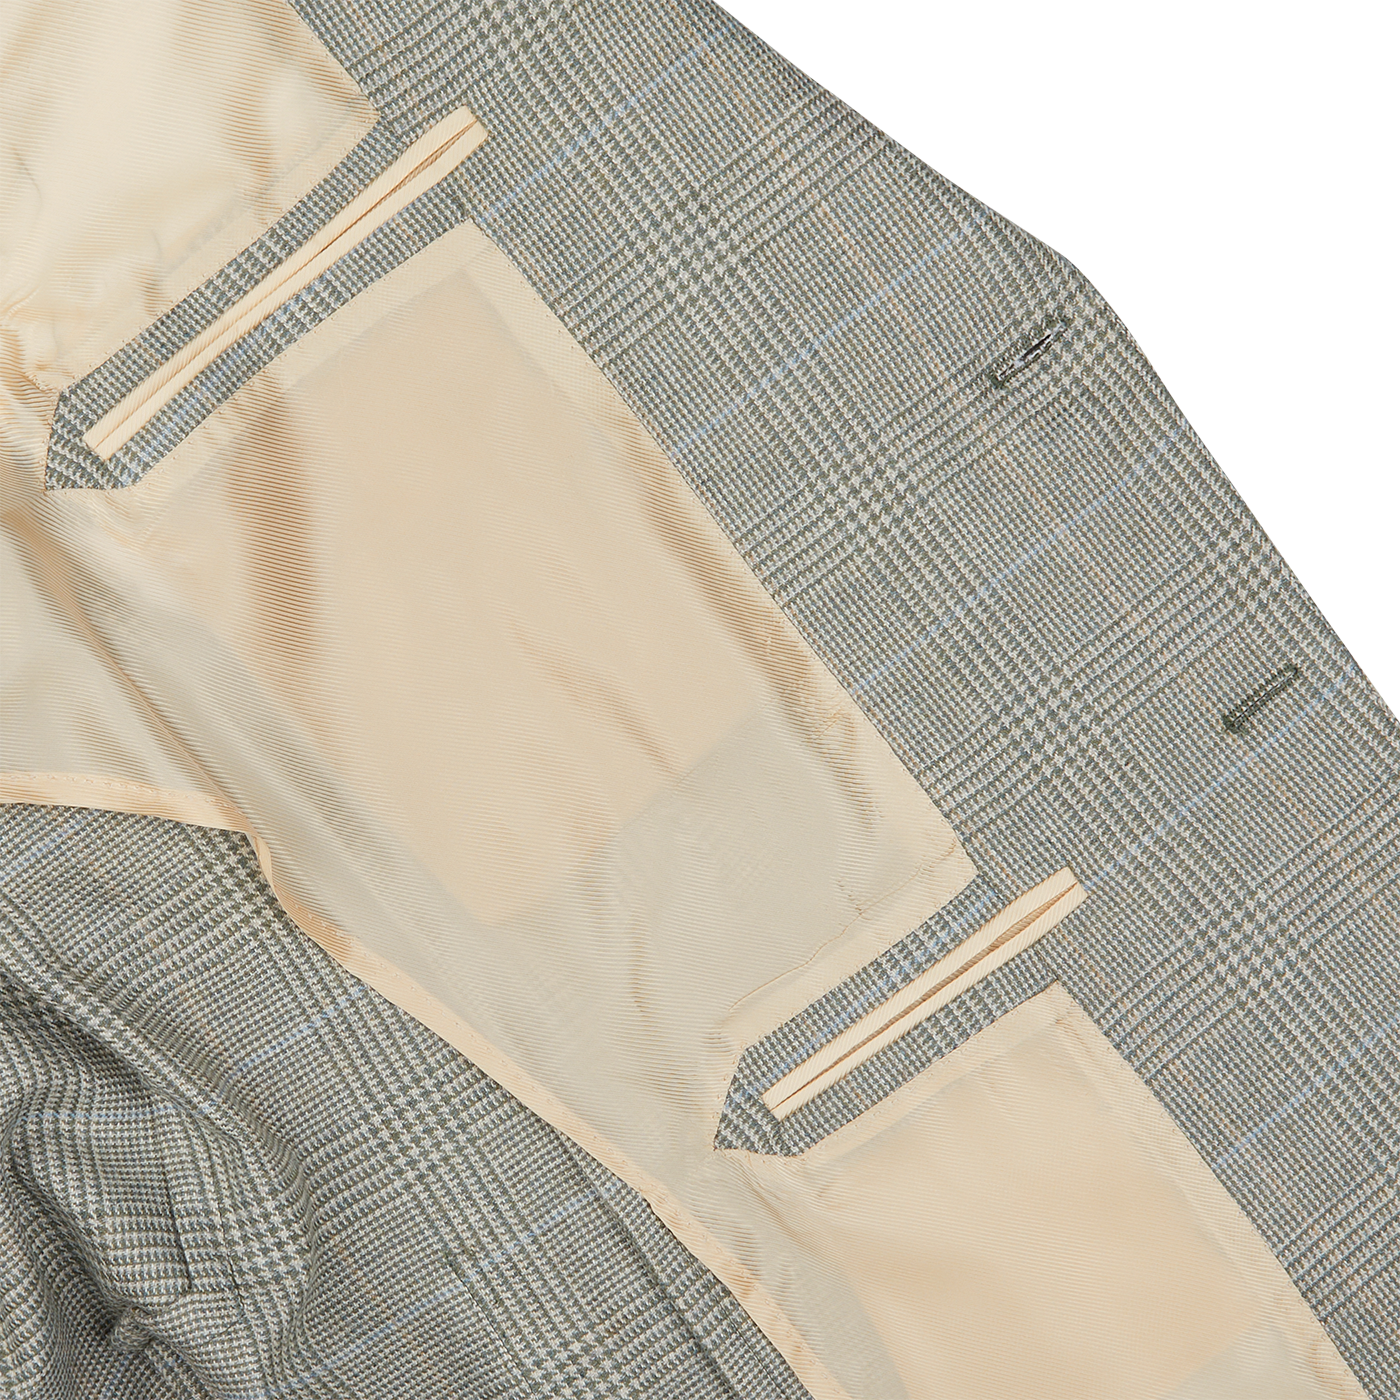 Close-up of a De Petrillo Green Checked Wool Cotton Cashmere Posillipo Blazer with its tailoring, lining, and inside pocket visible.